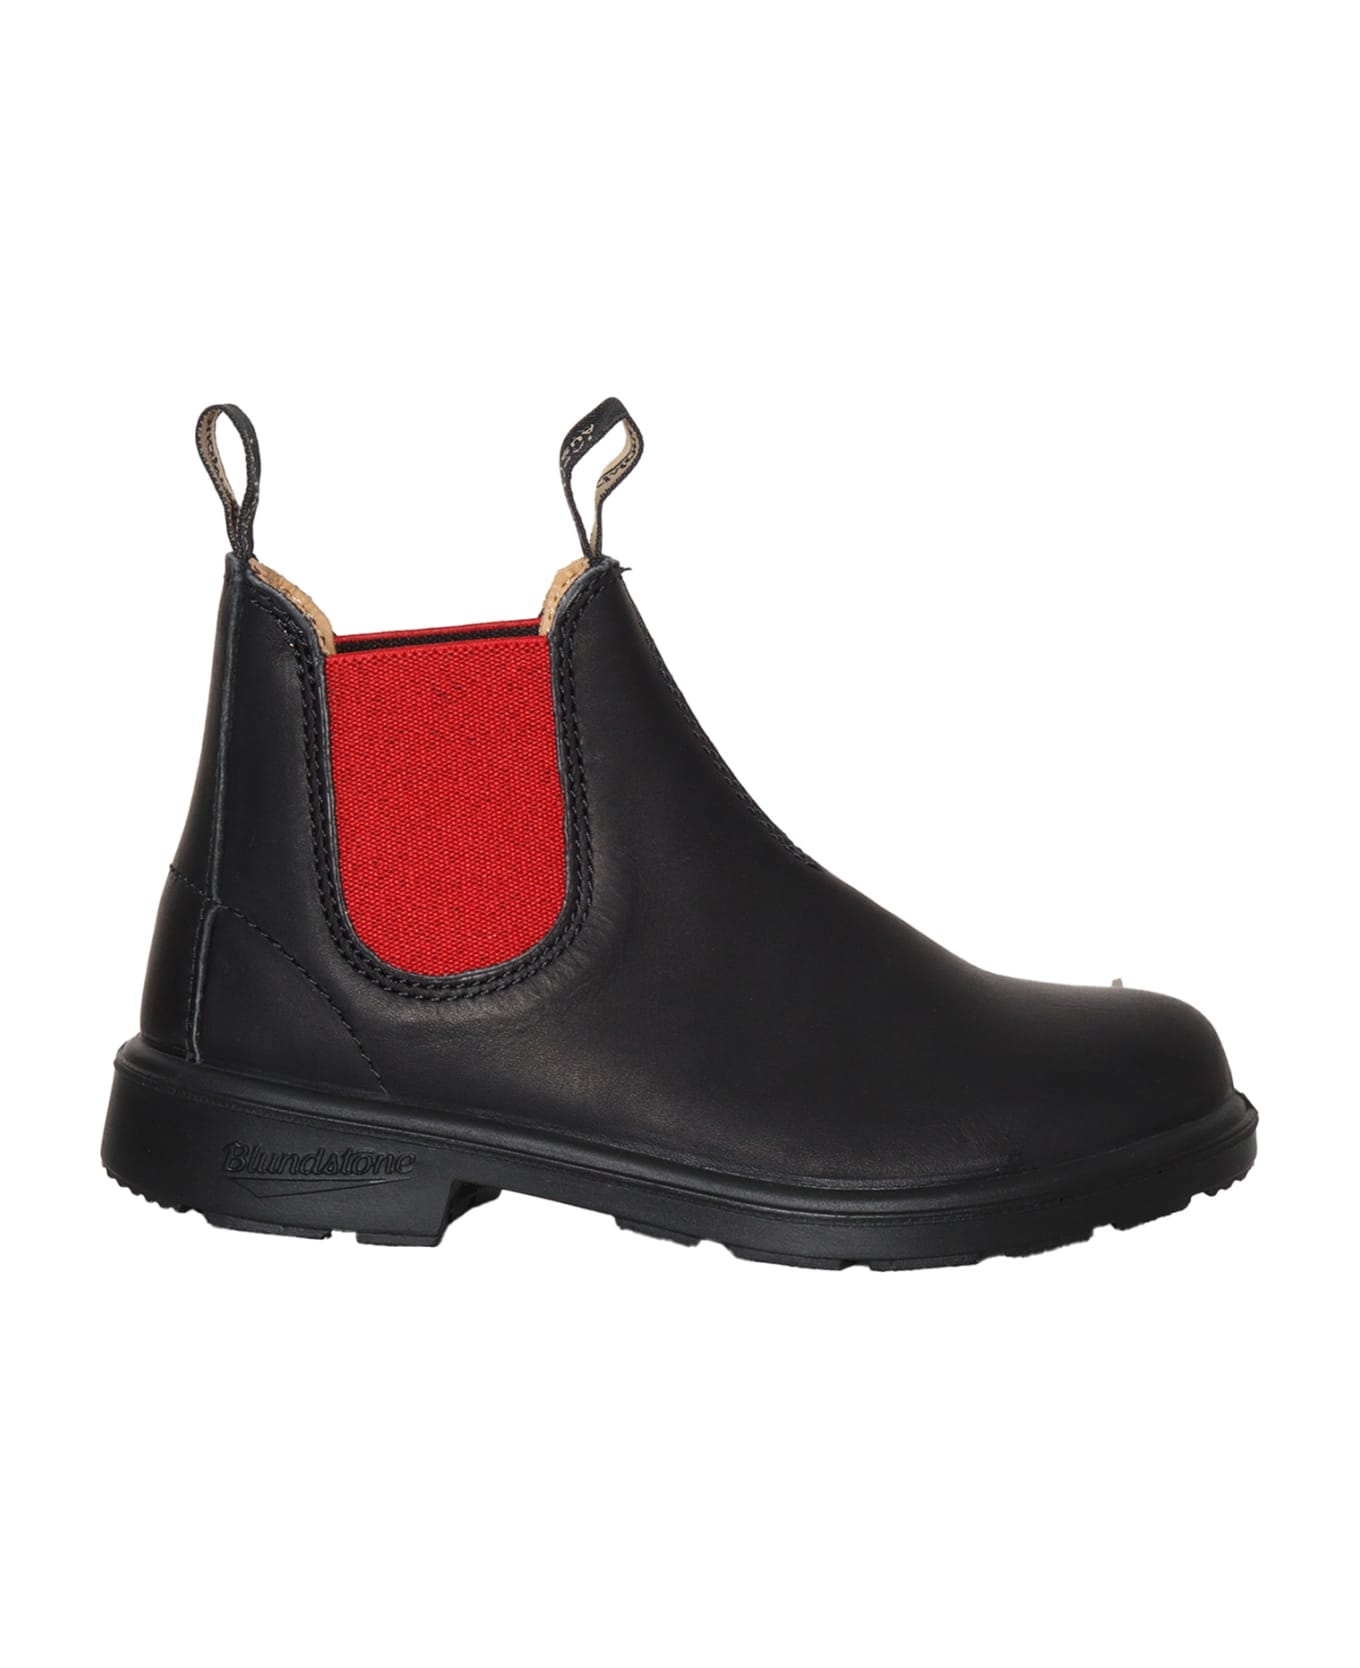 Blundstone 581 Ankle Boots - BLACK